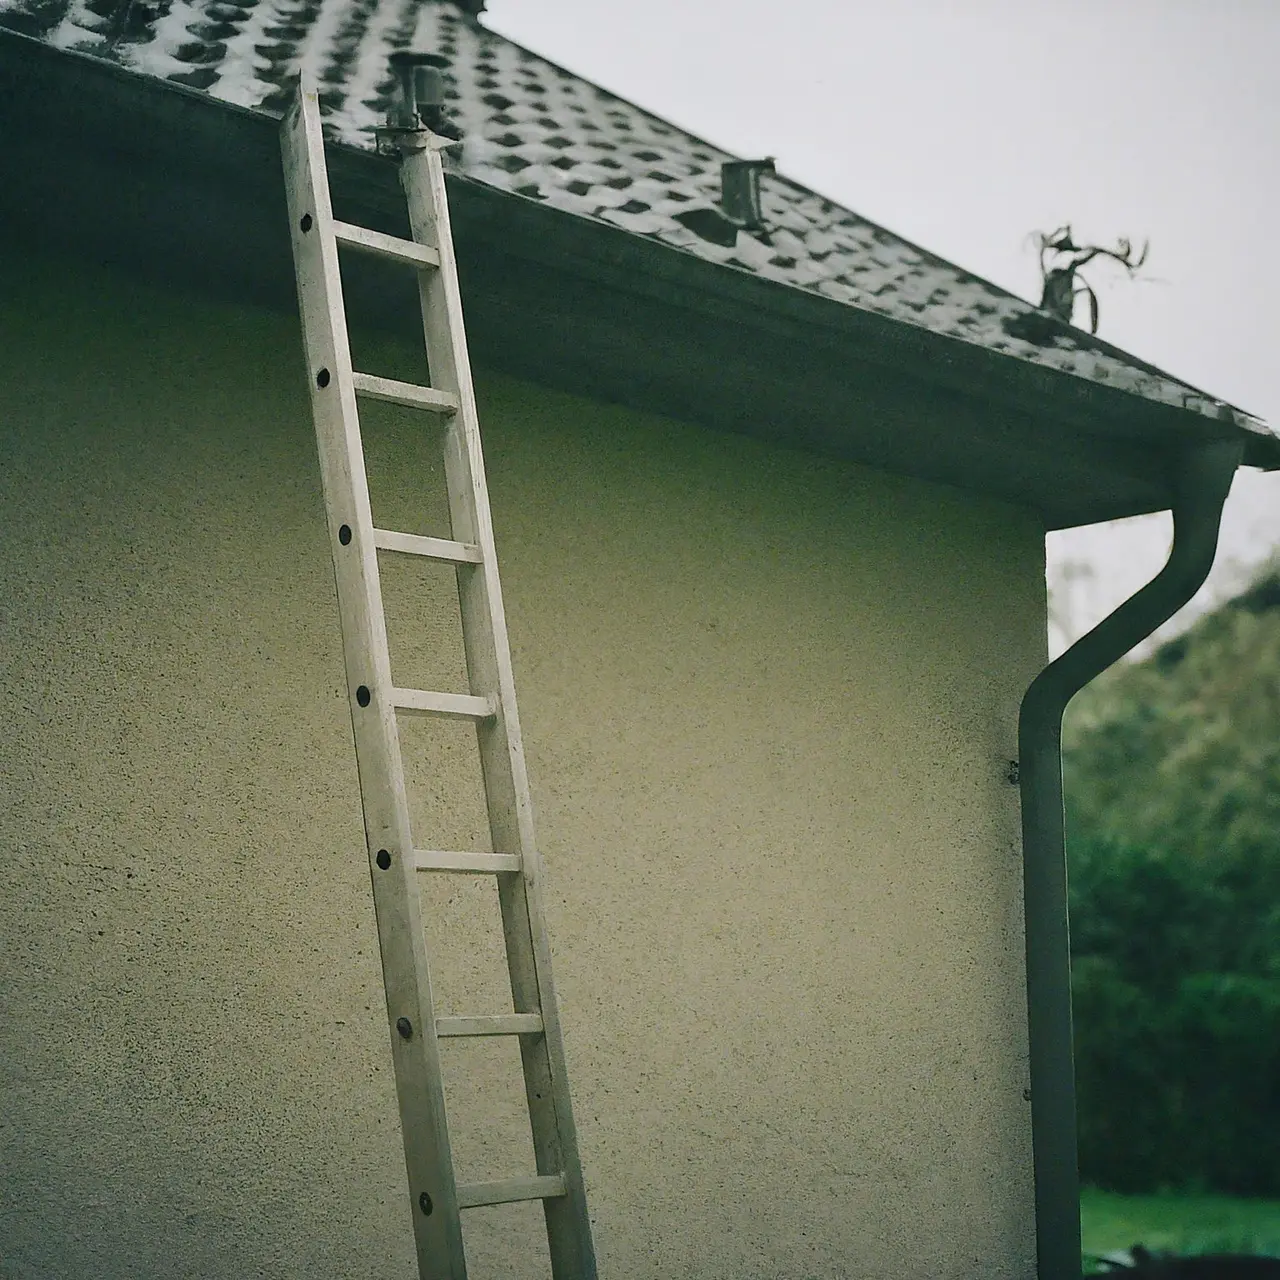 A ladder leaning against a house with clean gutters. 35mm stock photo